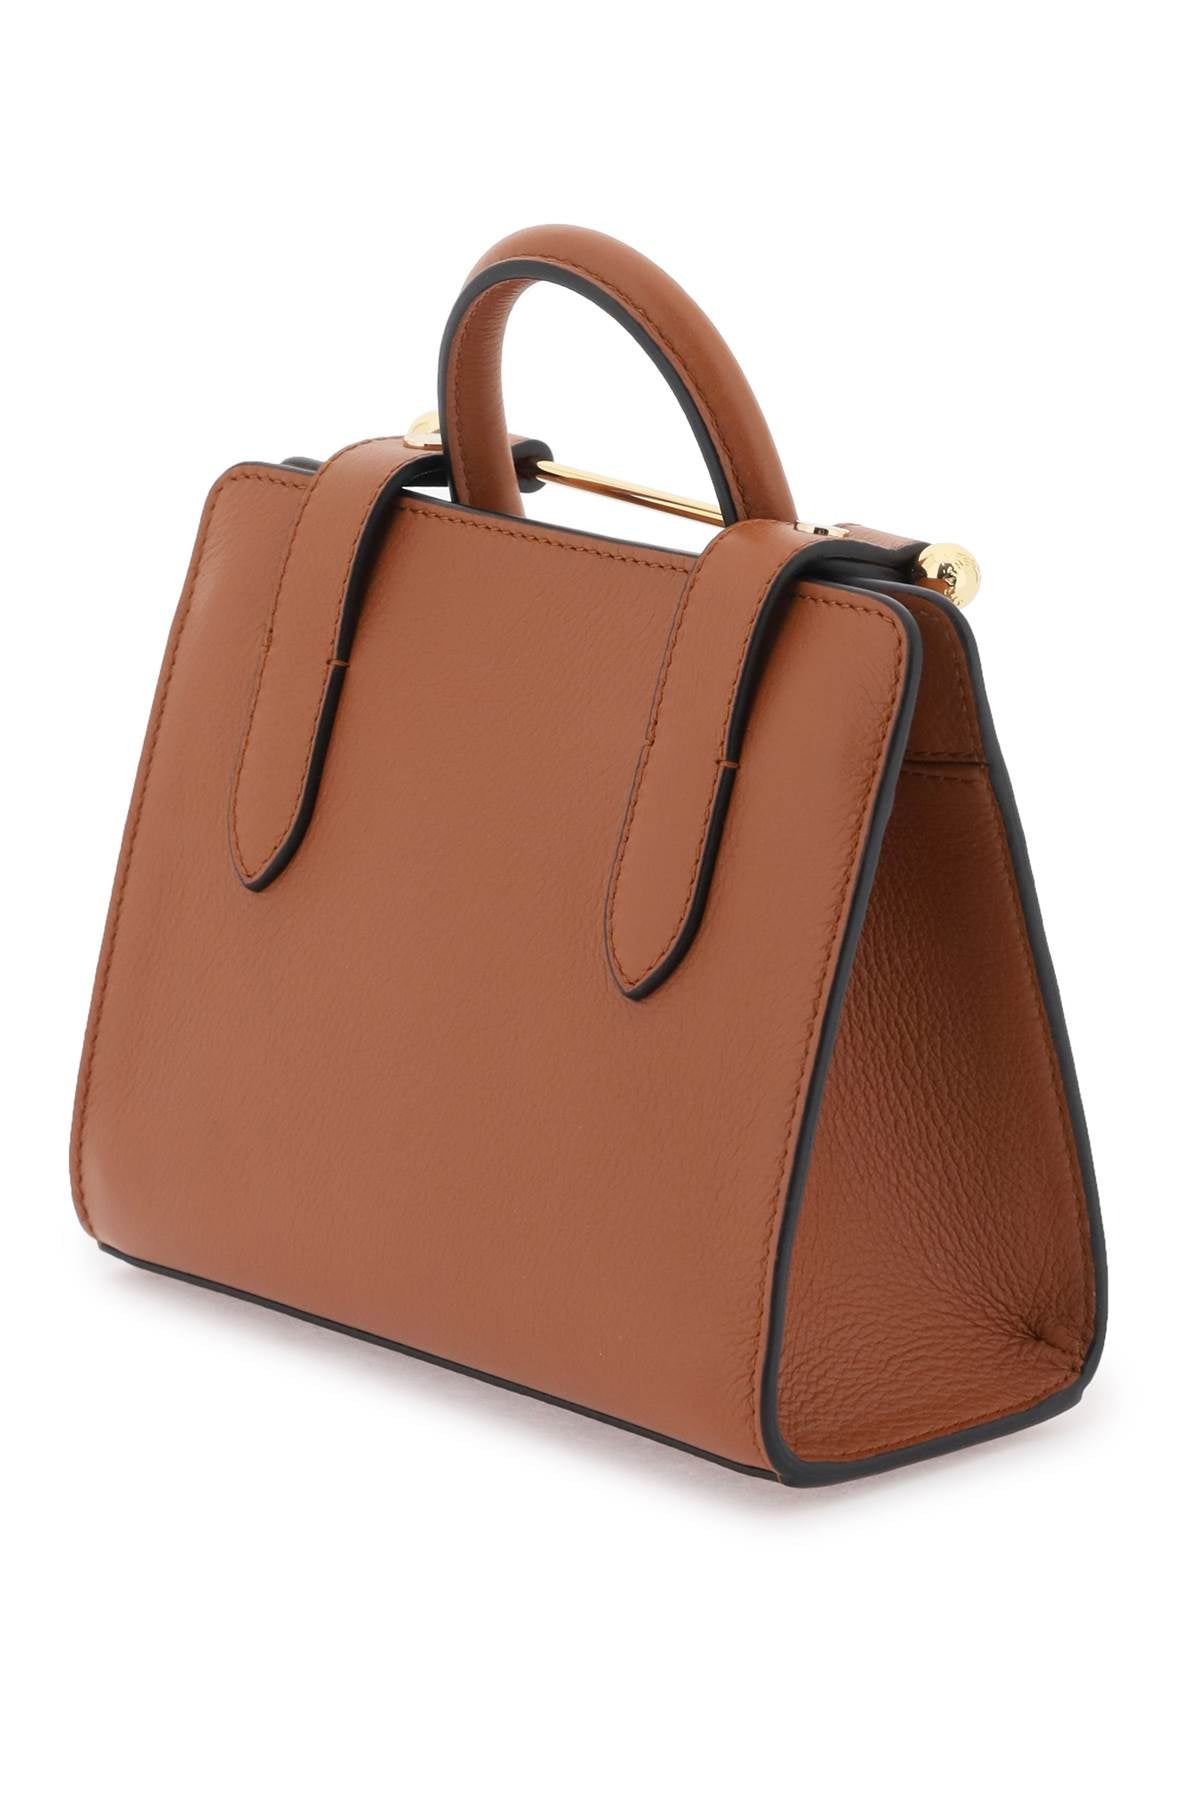 STRATHBERRY: nano tote bag in leather - Brown